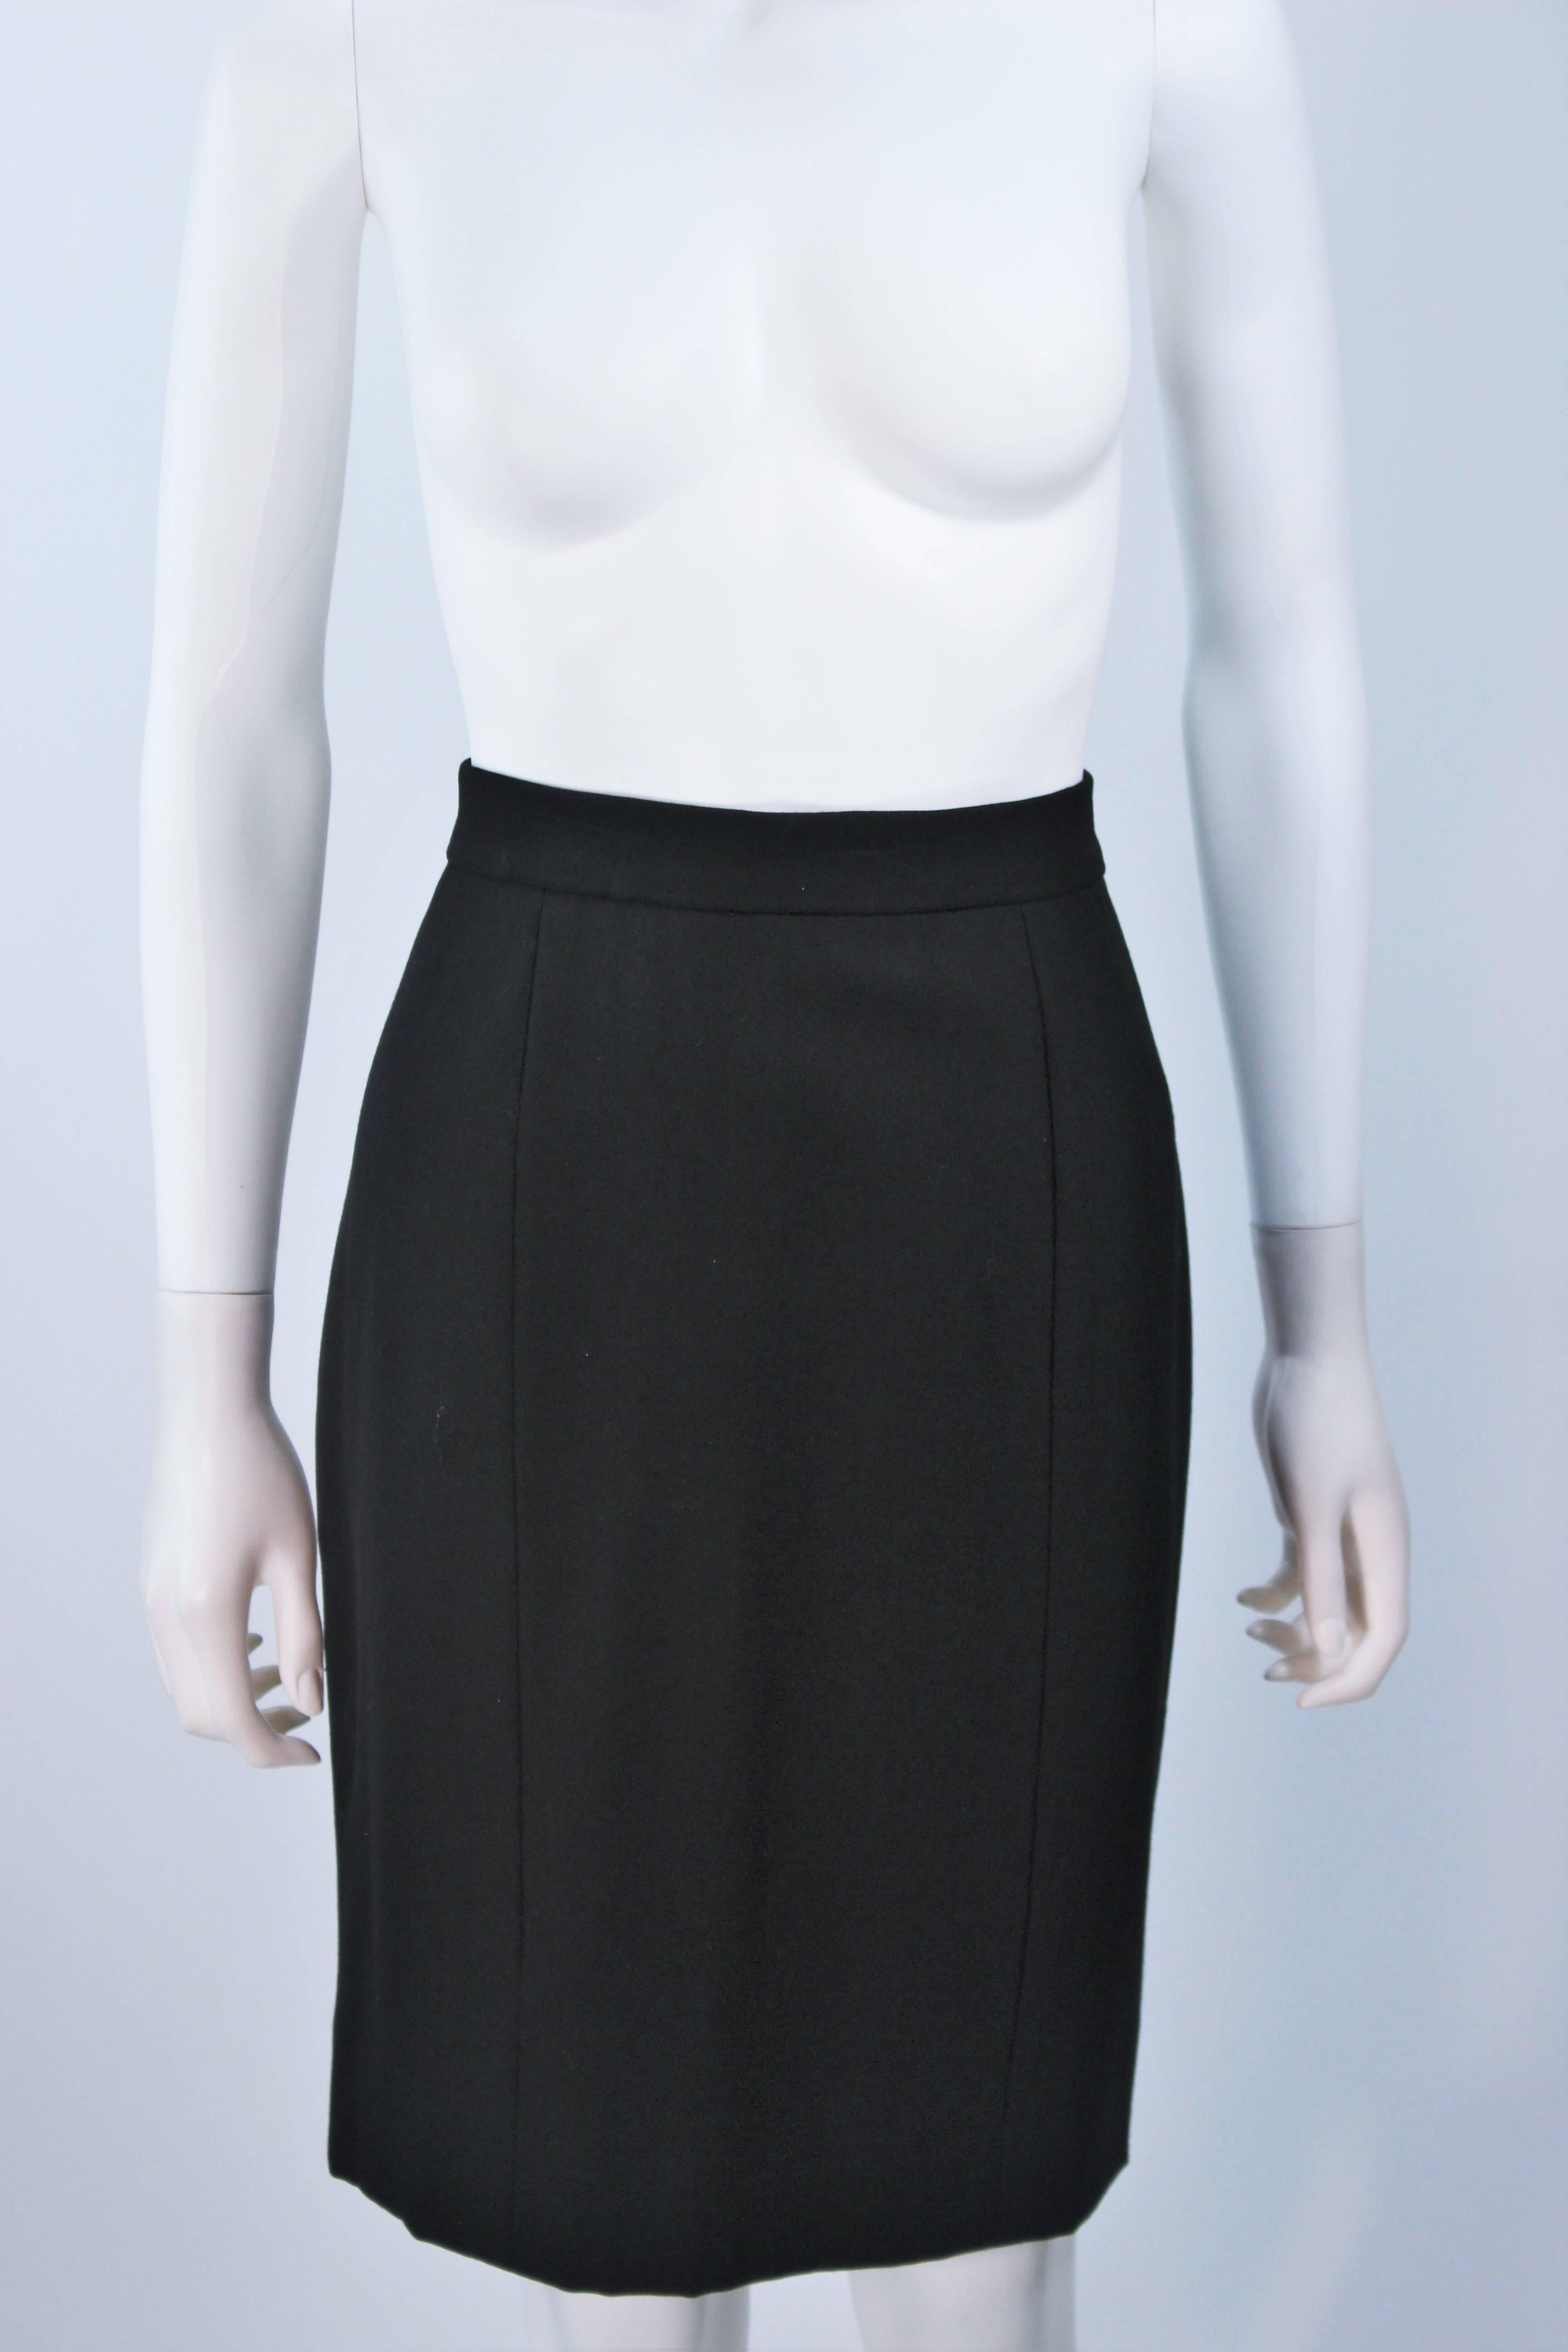 CHANEL BLACK WOOL BUTTON SKIRT SUIT With GOLD HARDWARE SIZE 38 3